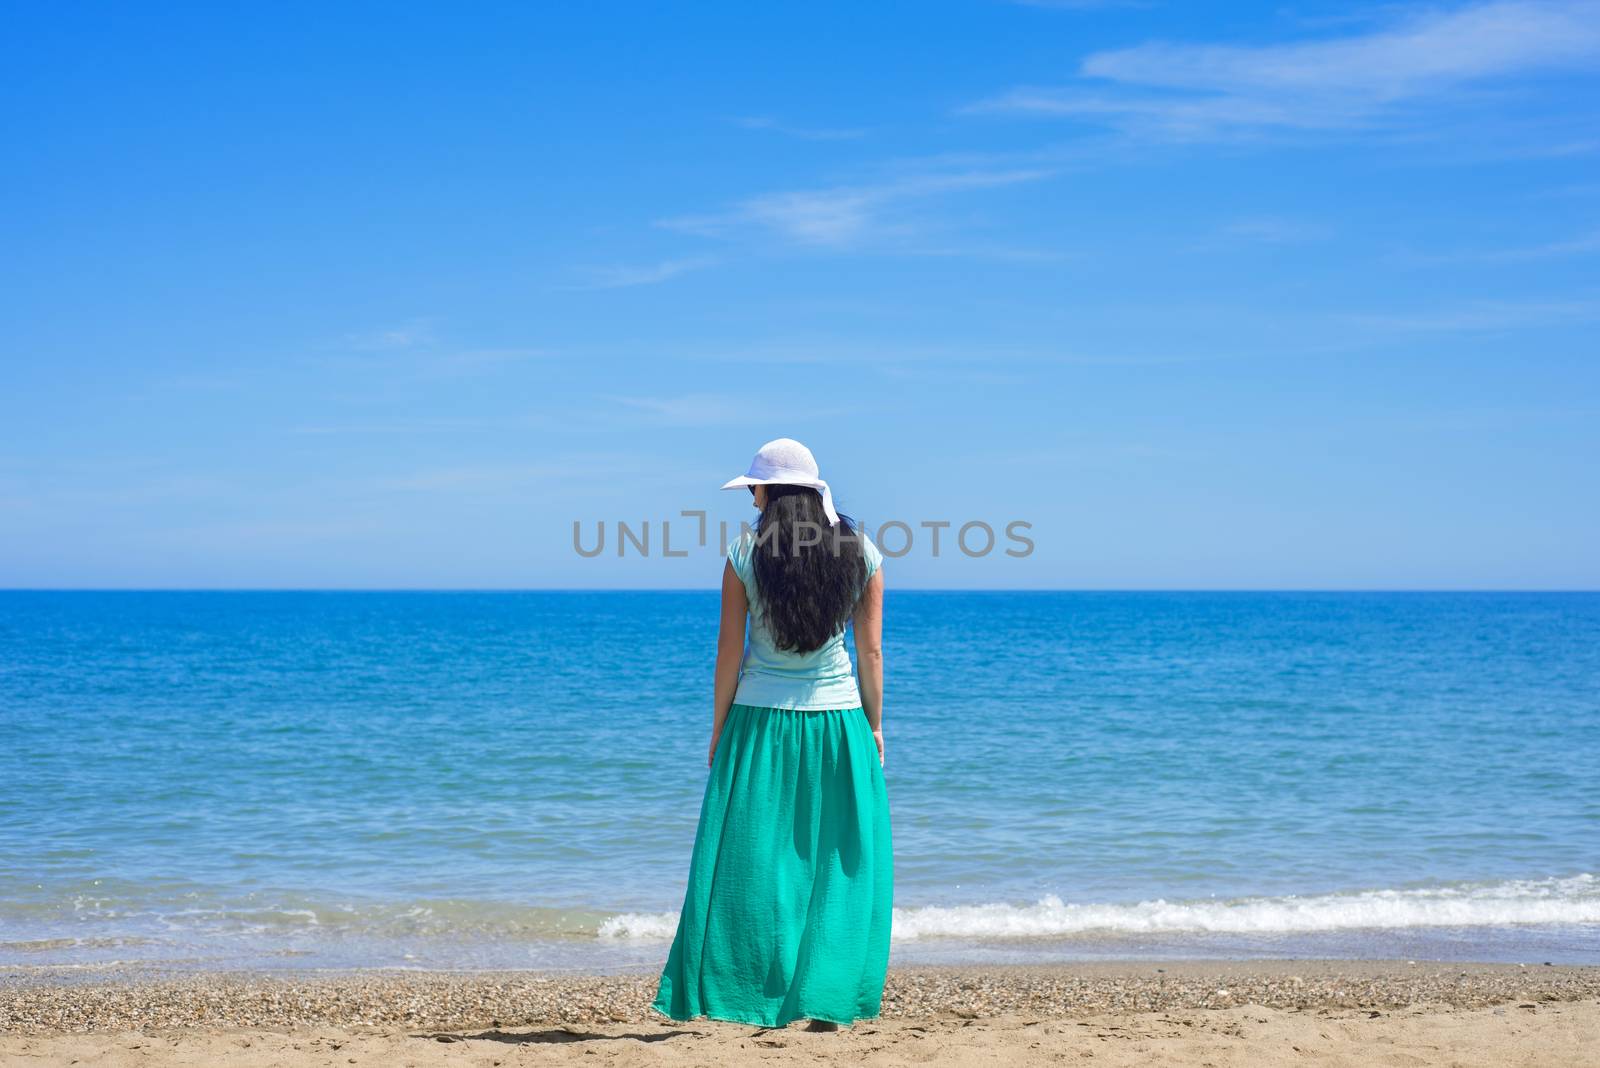 Brunette female with long hair standing alone on the sandy beach